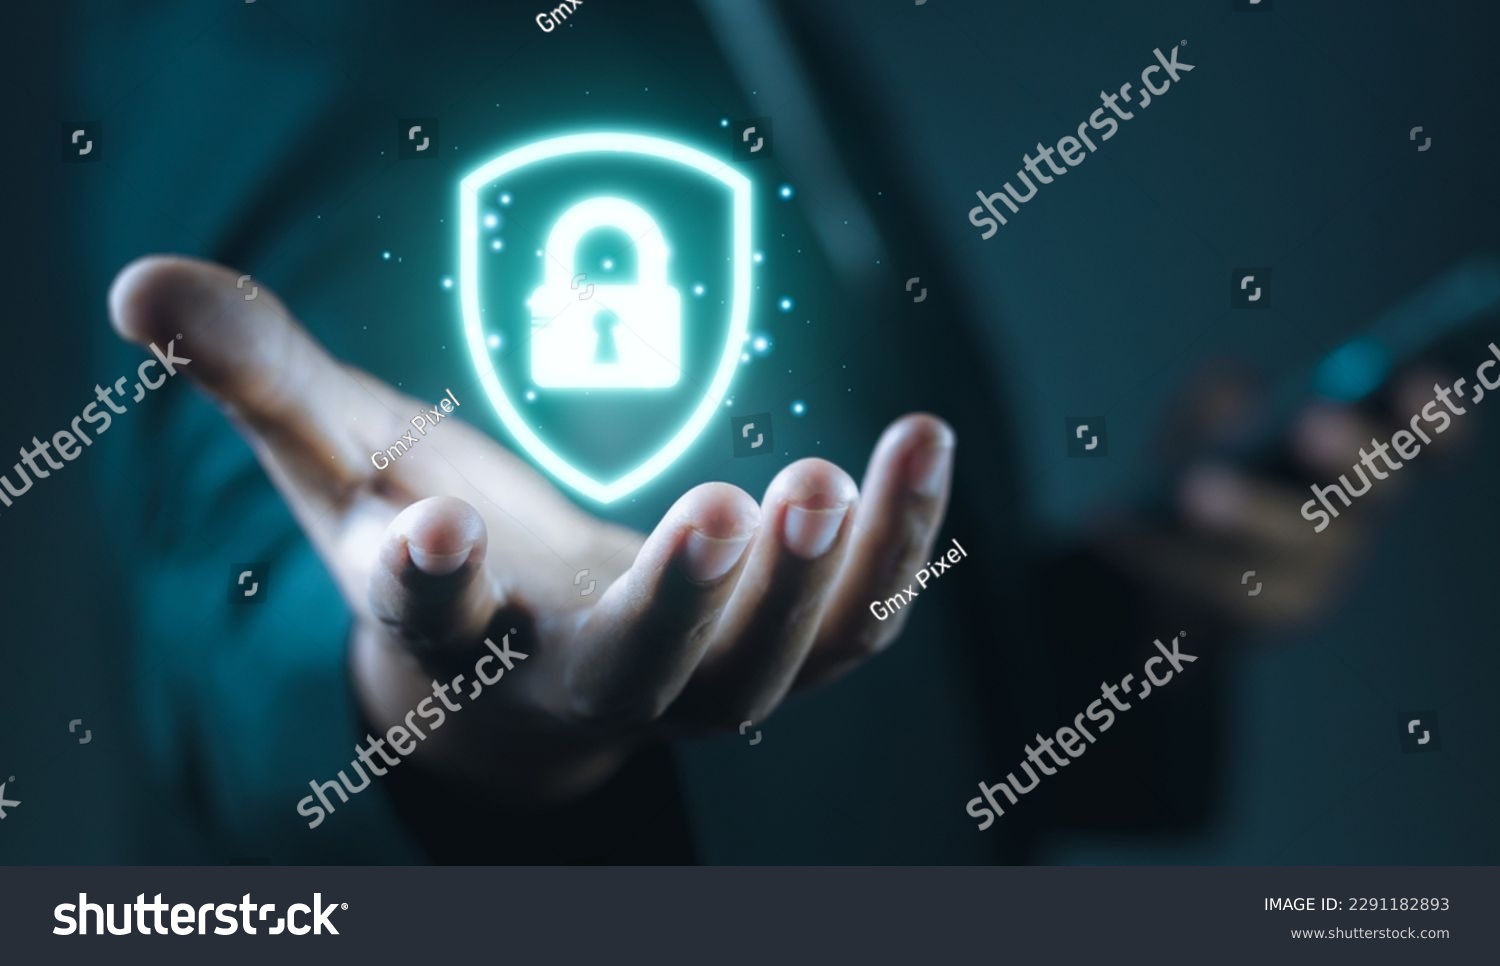 Cyber security network. Businessman holding Padlock shield icon and internet technology networking and protecting data personal information. privacy security. Data protection privacy concept. GDPR. EU #2291182893